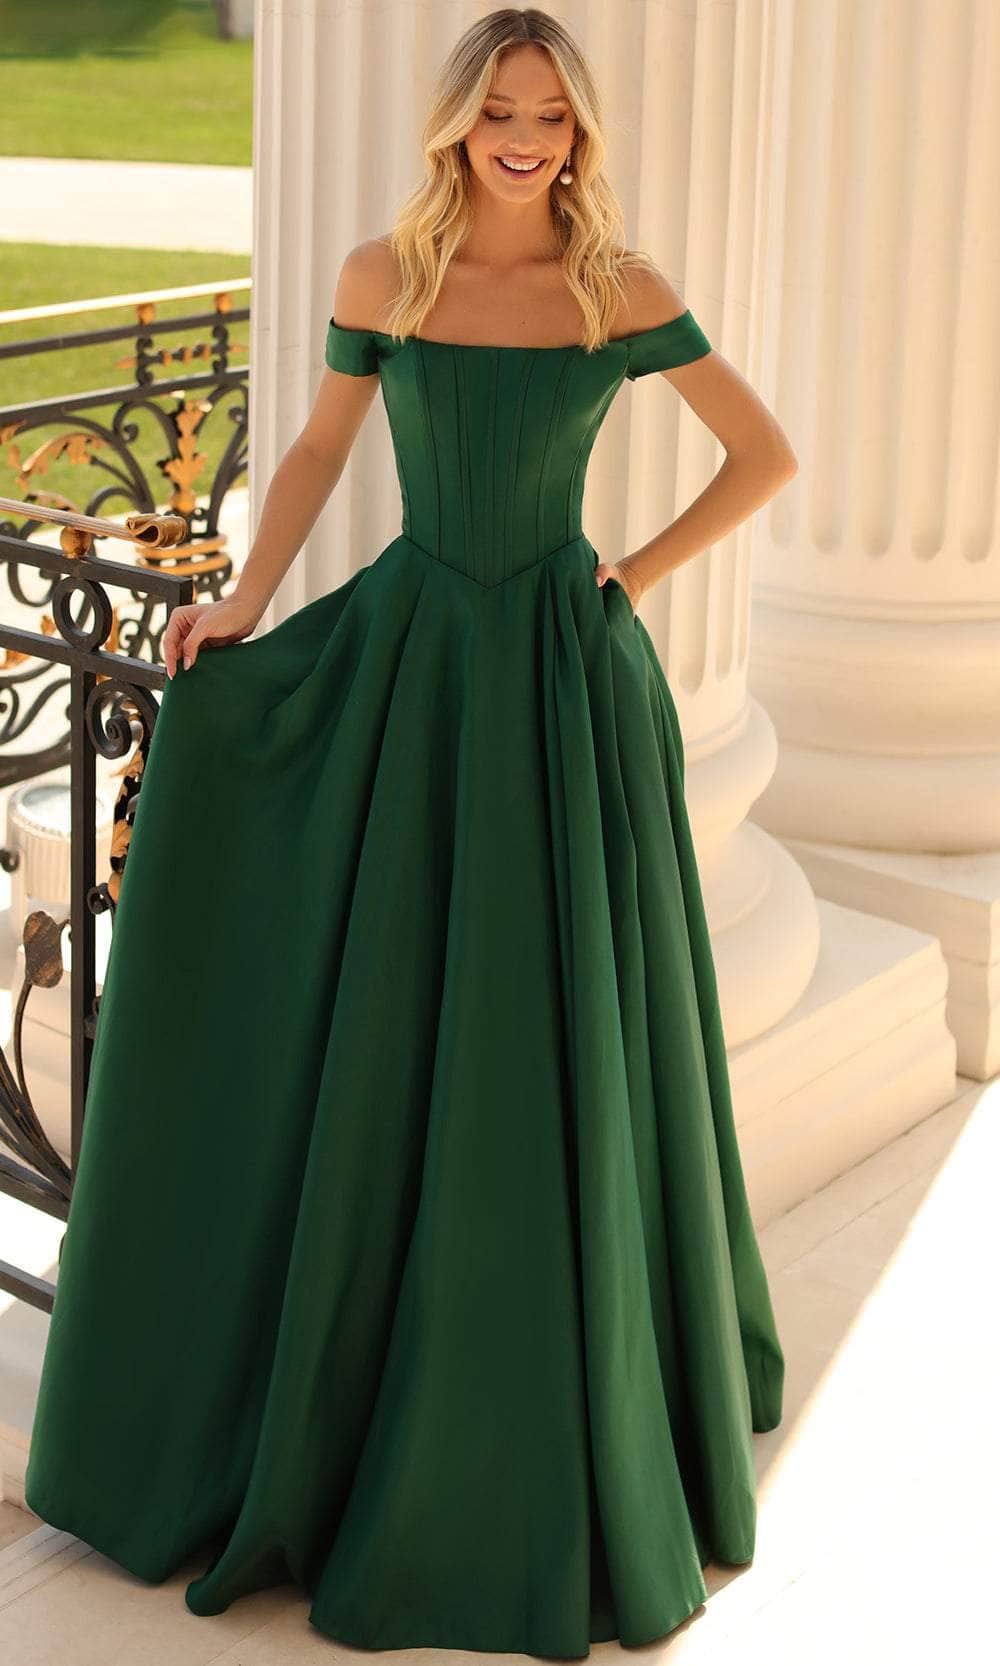 Clarisse 810604 - Off Shoulder Corset Prom Dress Special Occasion Dress 0 / Forest Green